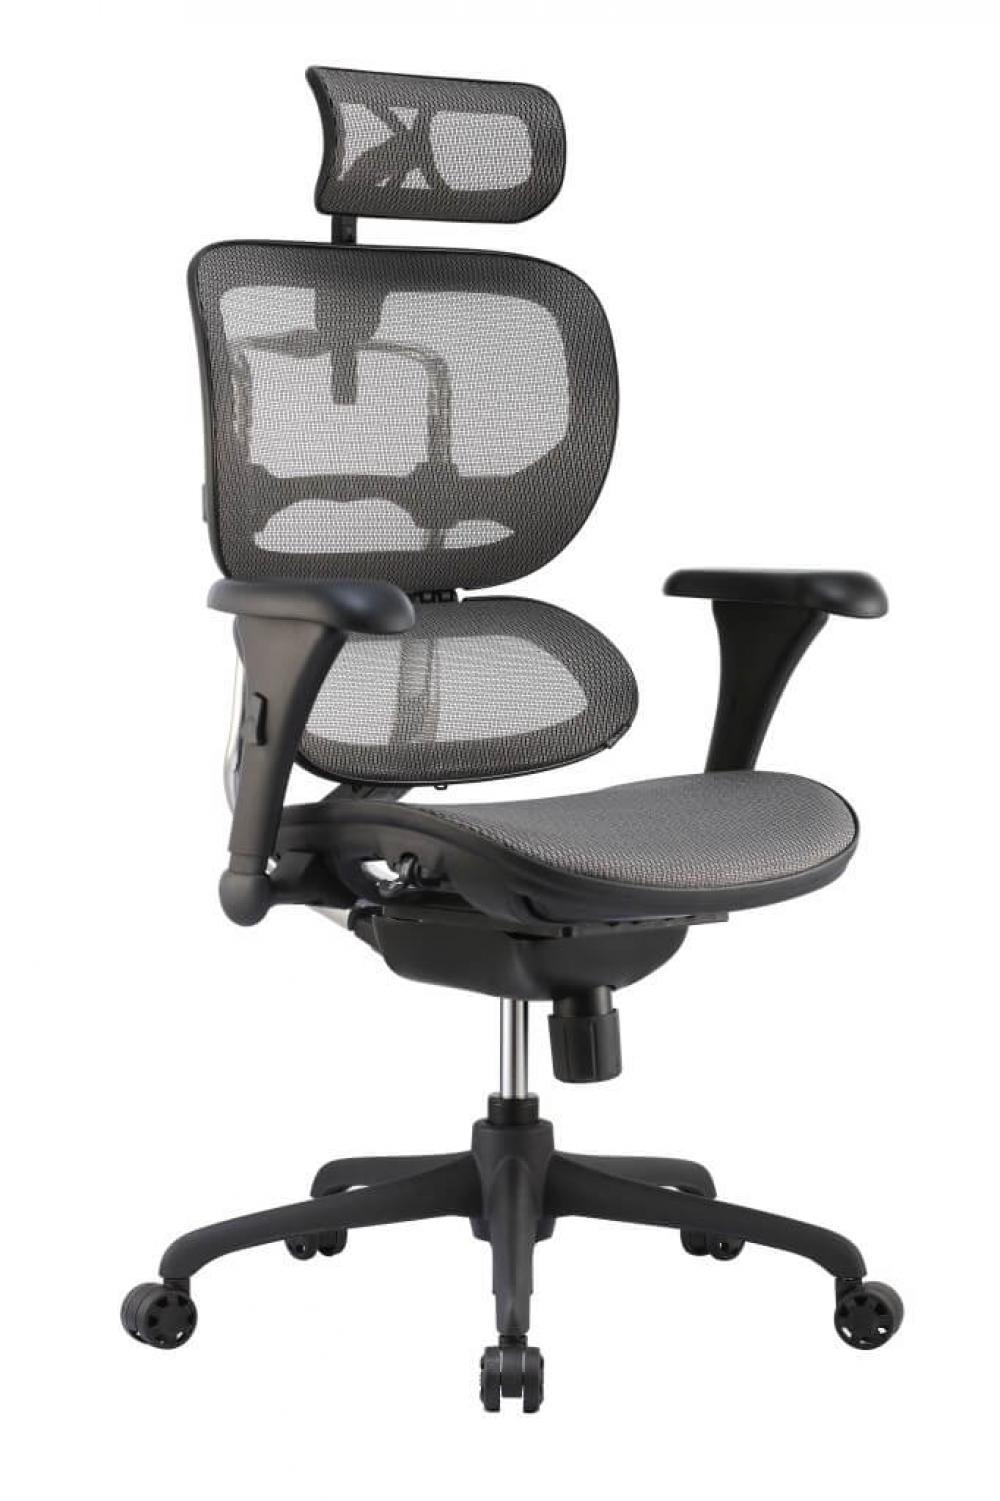 office-furniture-chairs-high-back-office-chairs.jpg